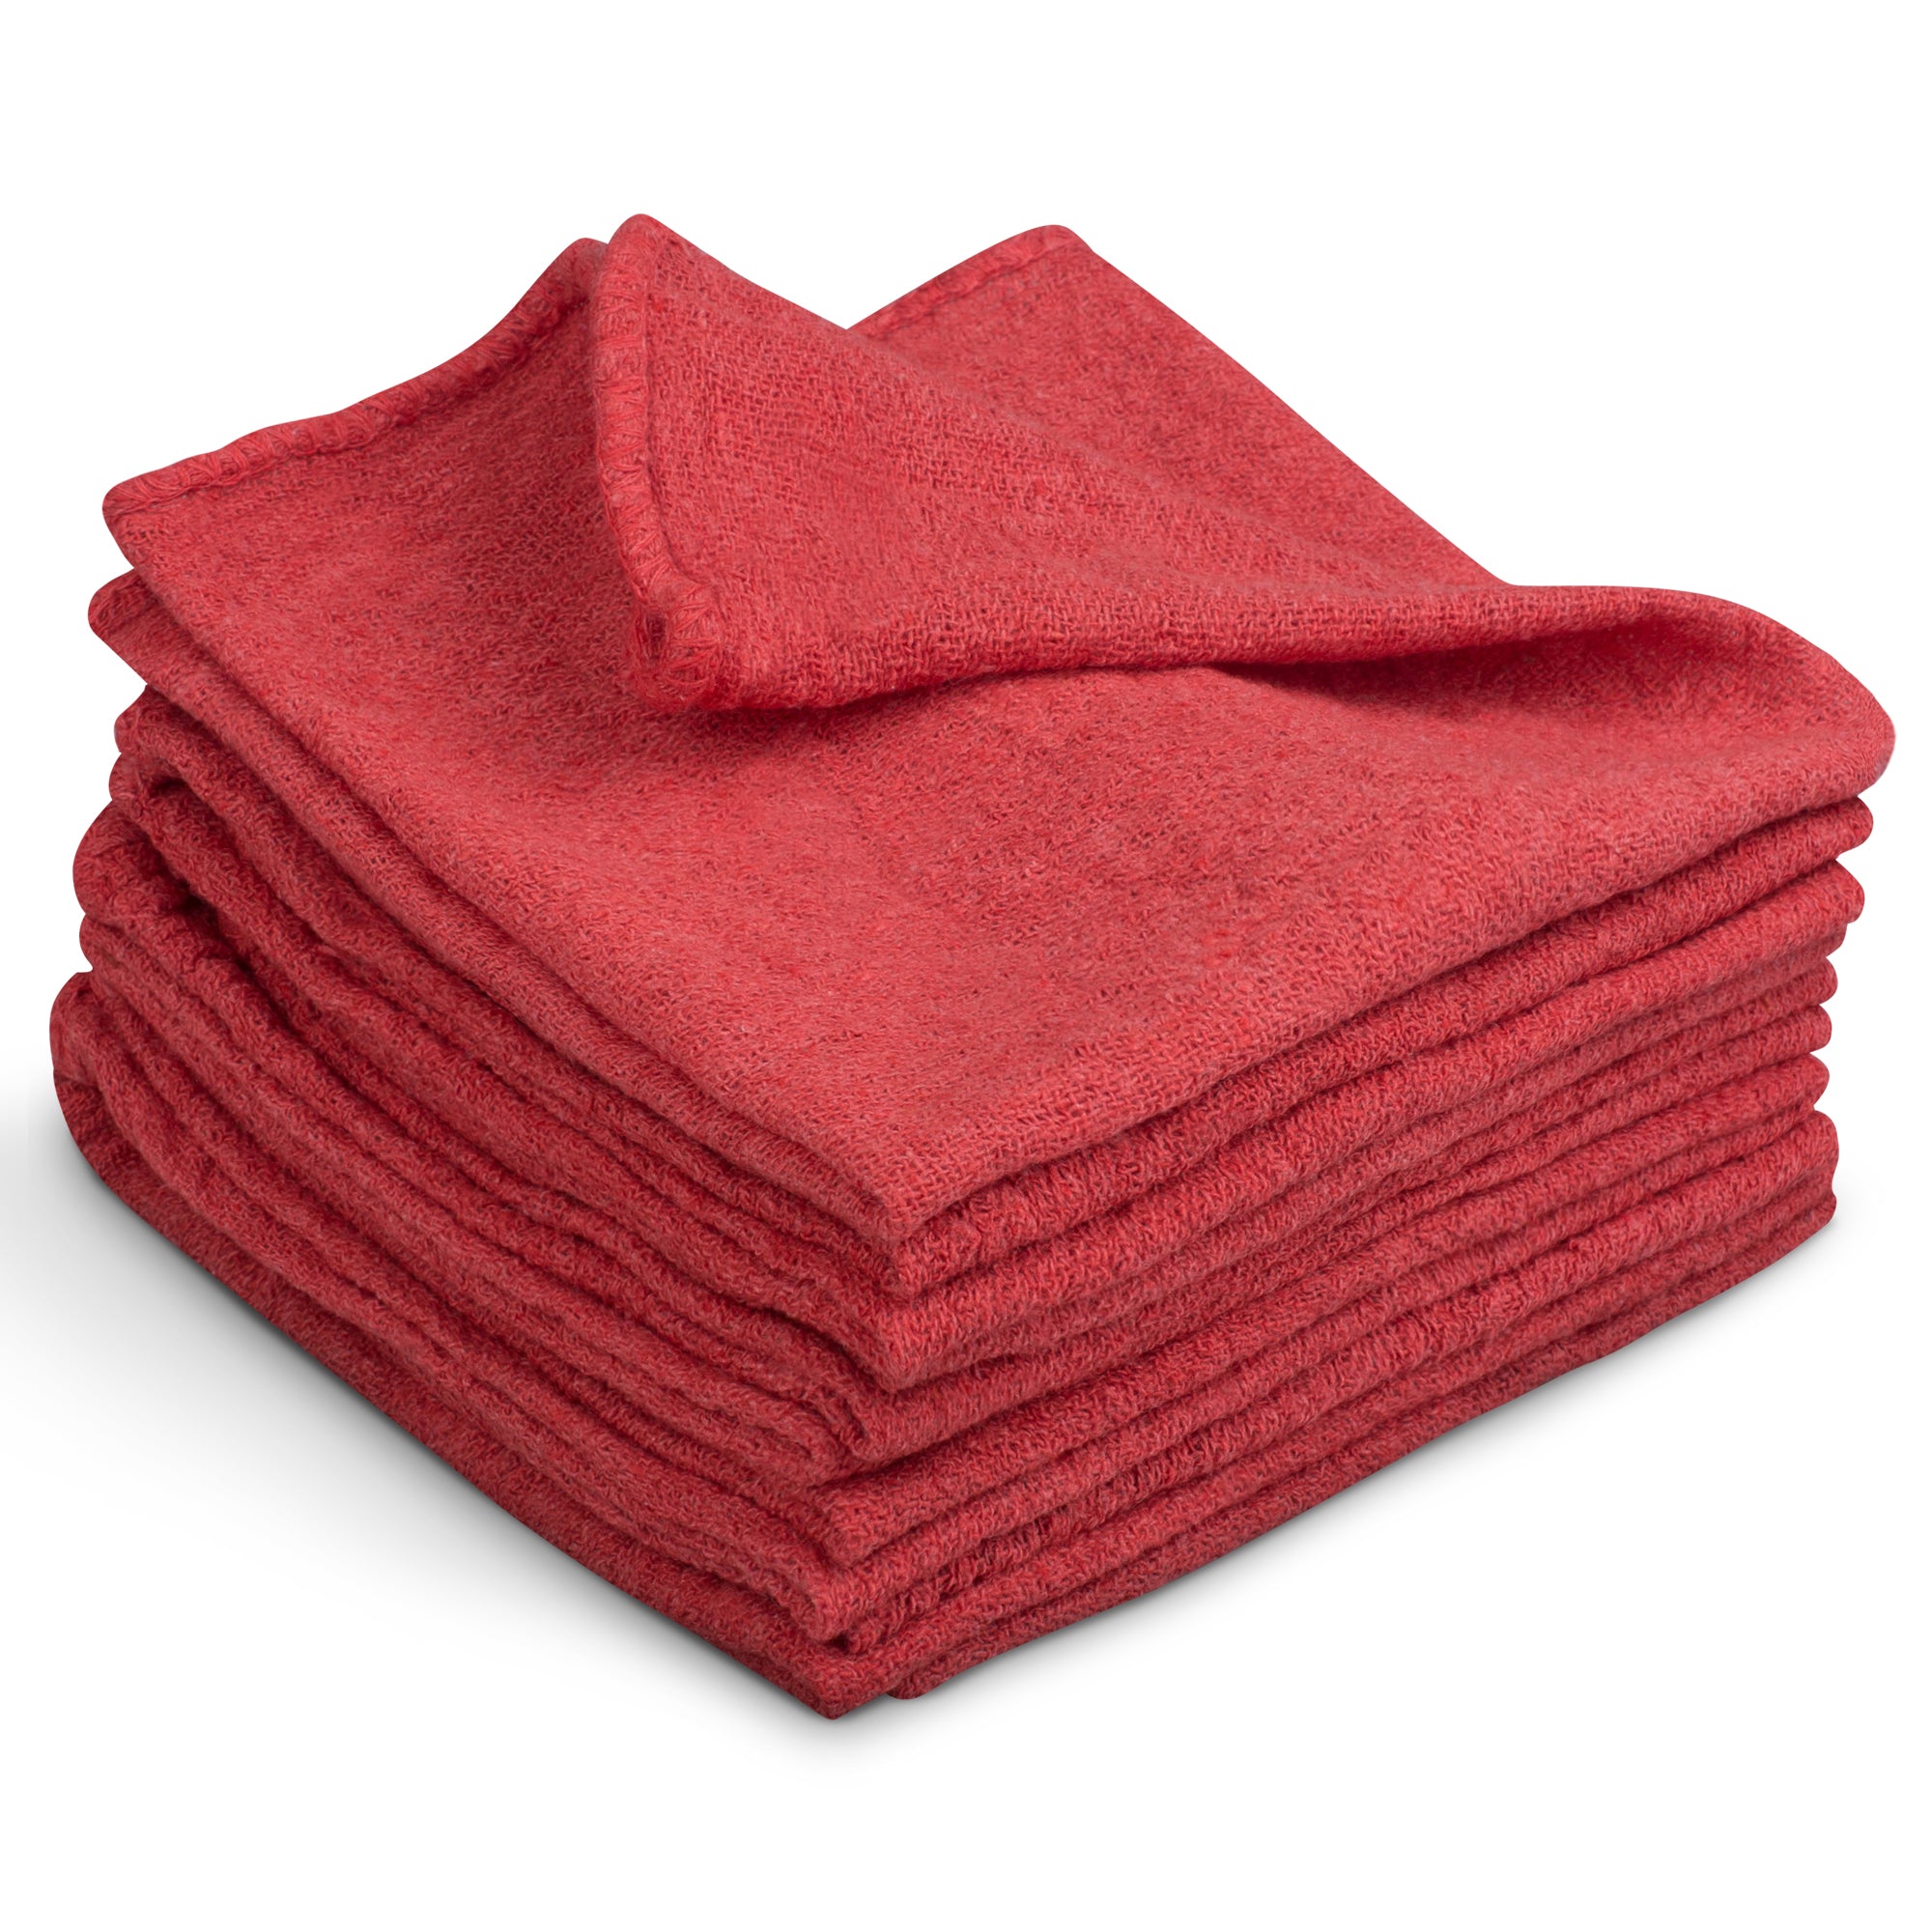 Member's Mark Commercial 12 x 14 Shop Towels, Red (100 Count